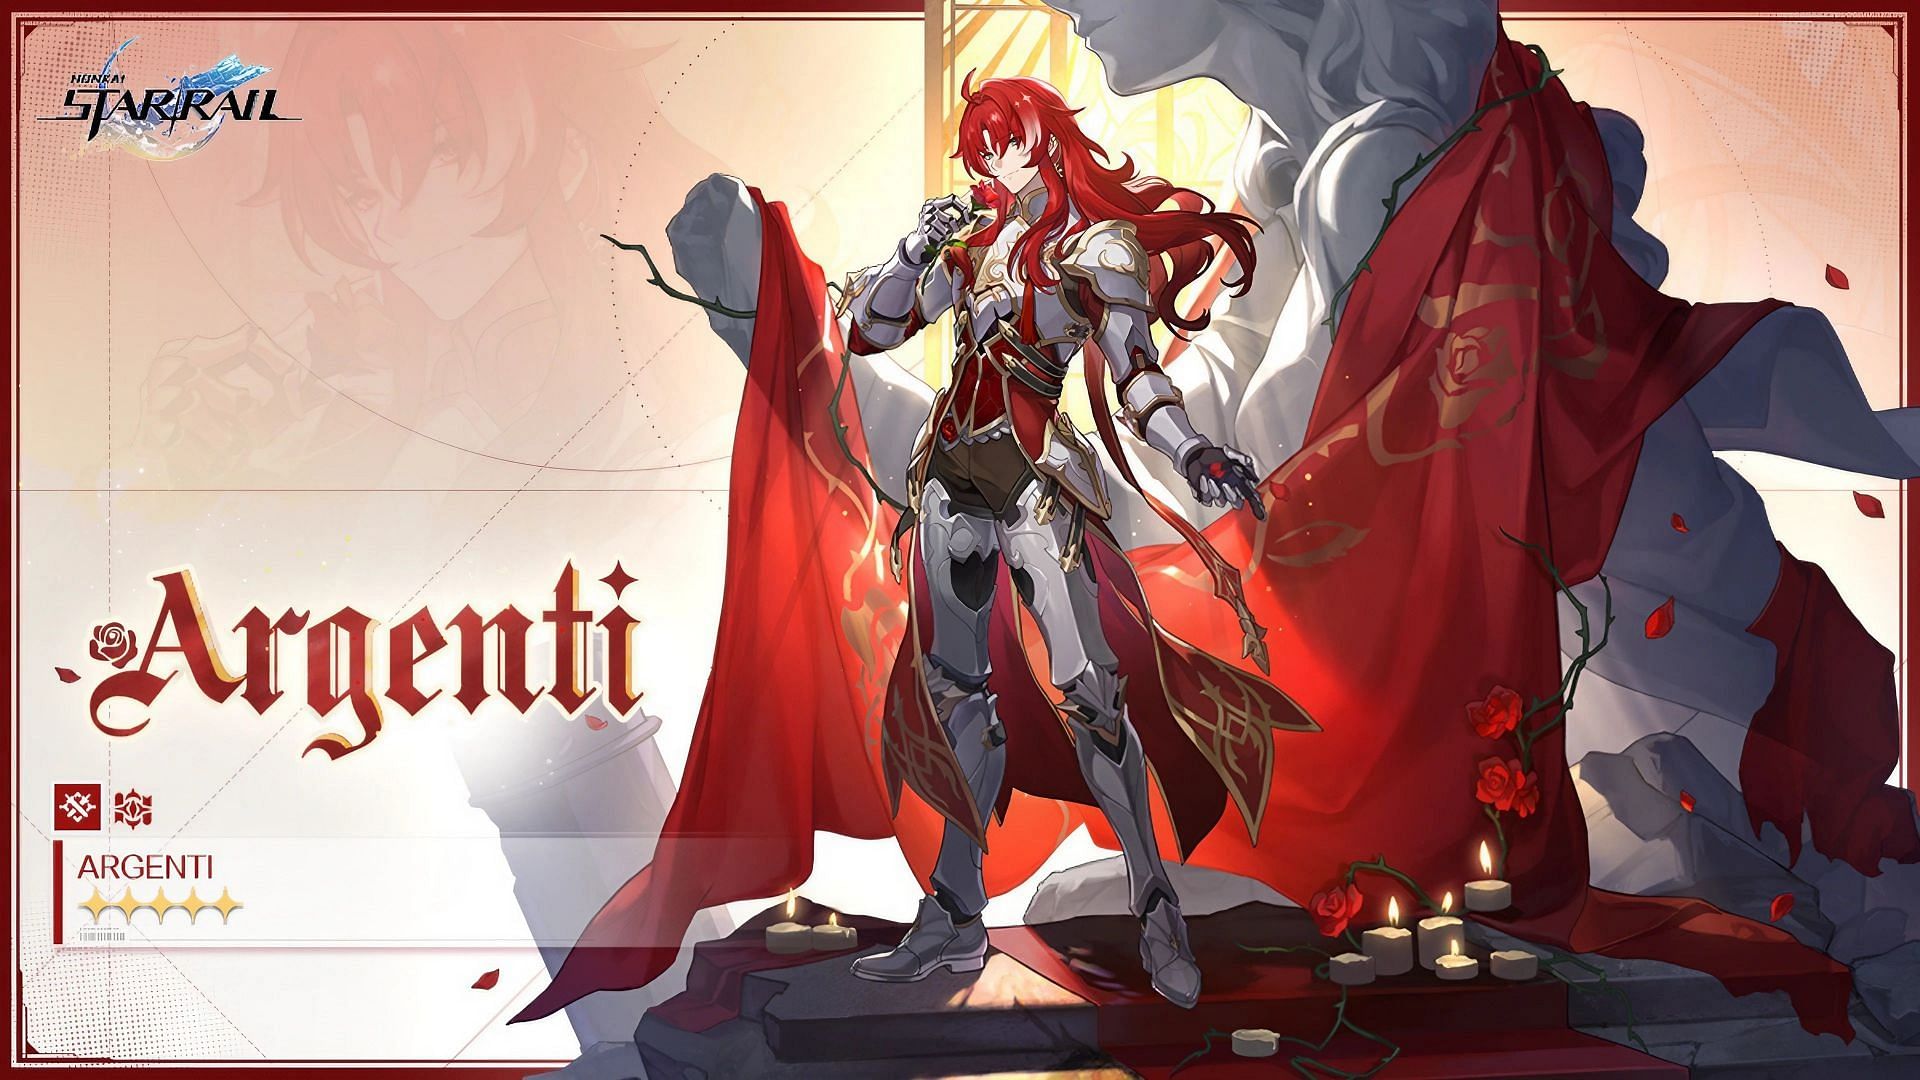 The official artwork for Argenti 